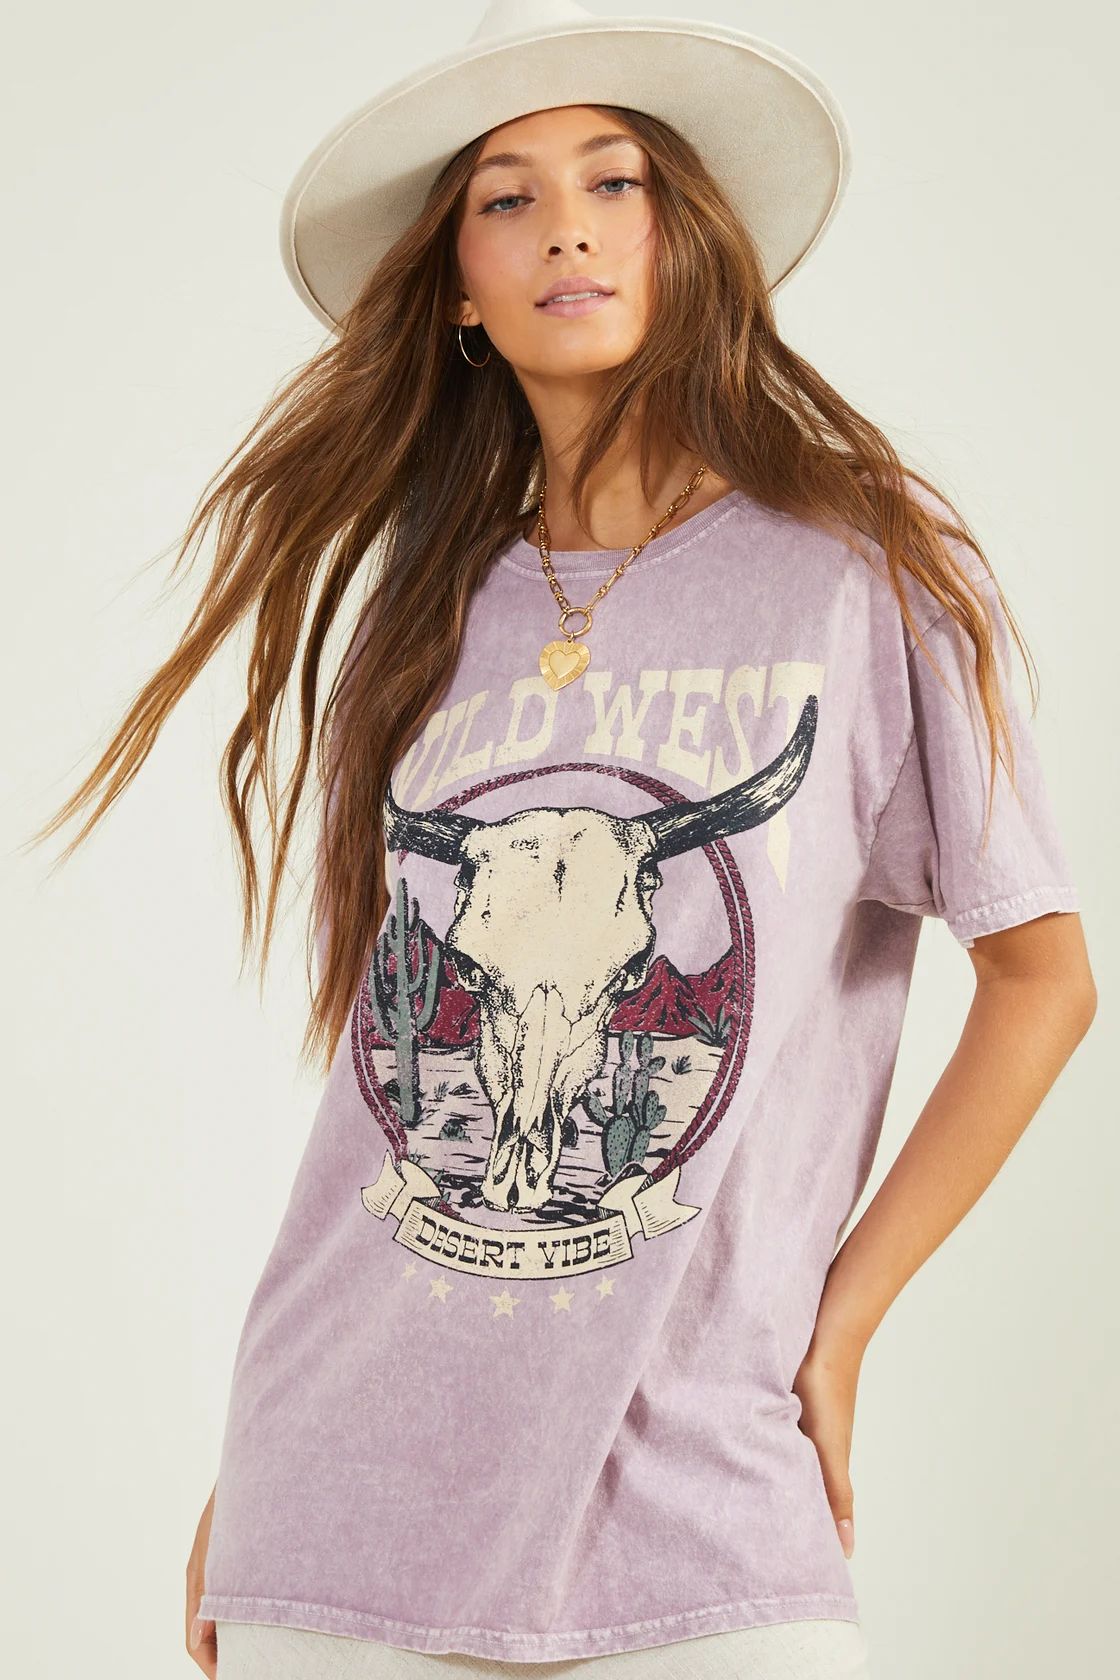 Wild West Oversized Graphic Tee in Elderberry | Altar'd State | Altar'd State